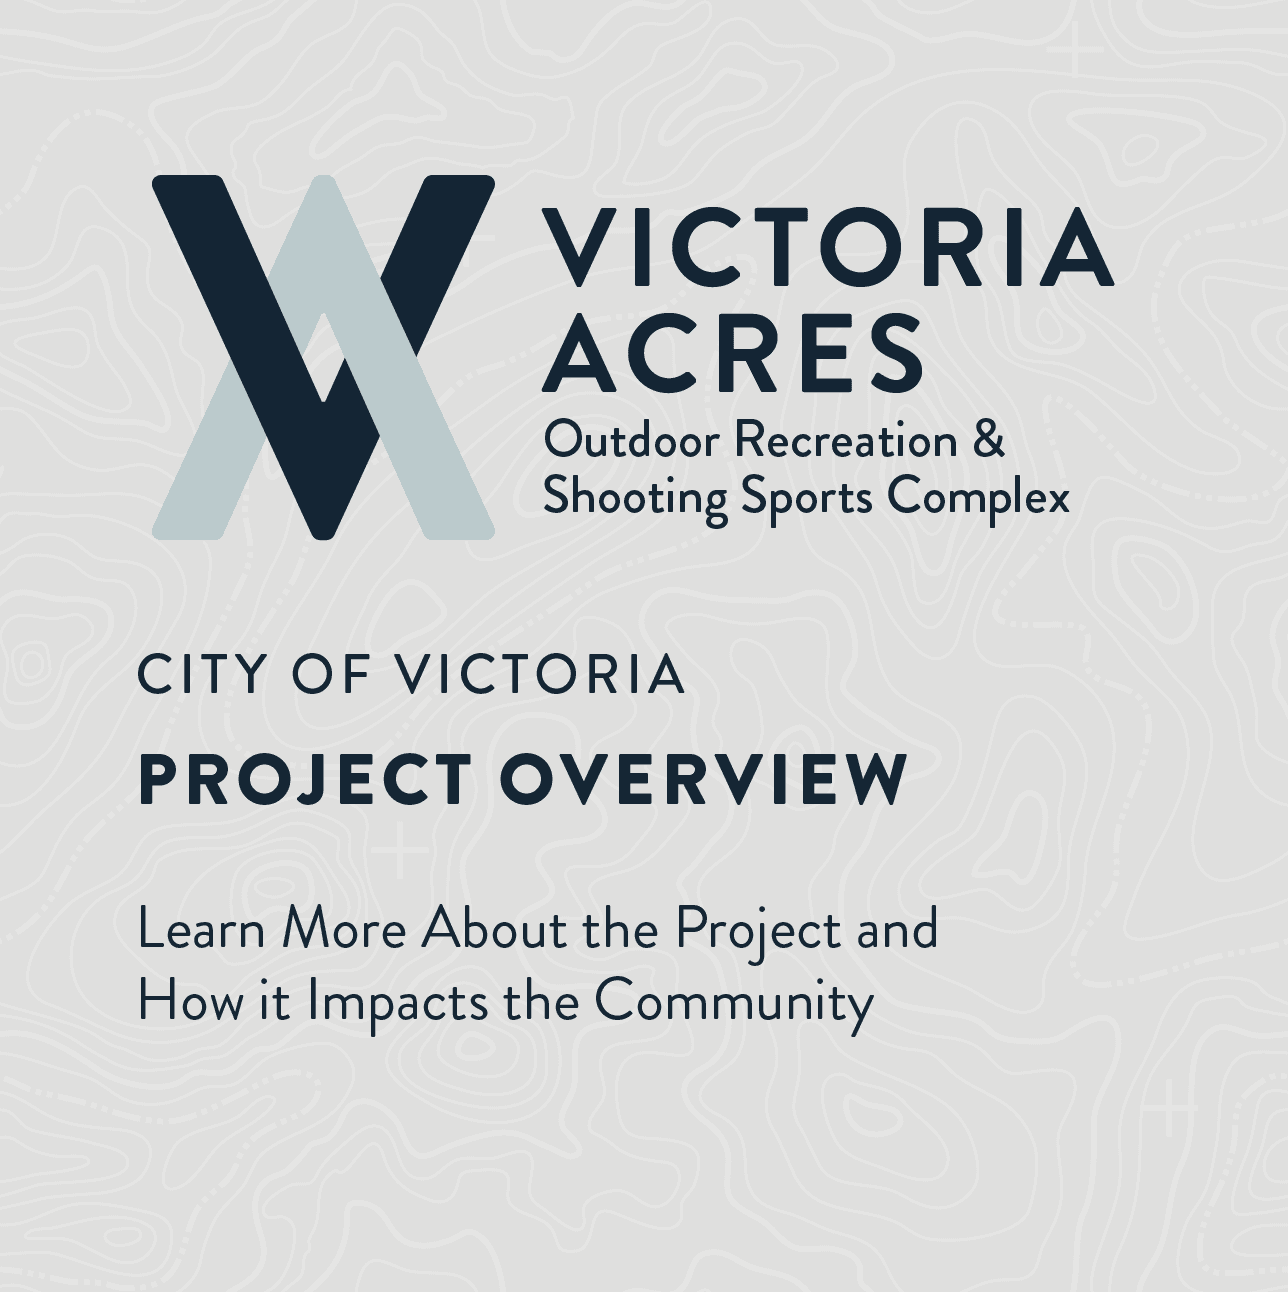 Victoria Acres Project Overview